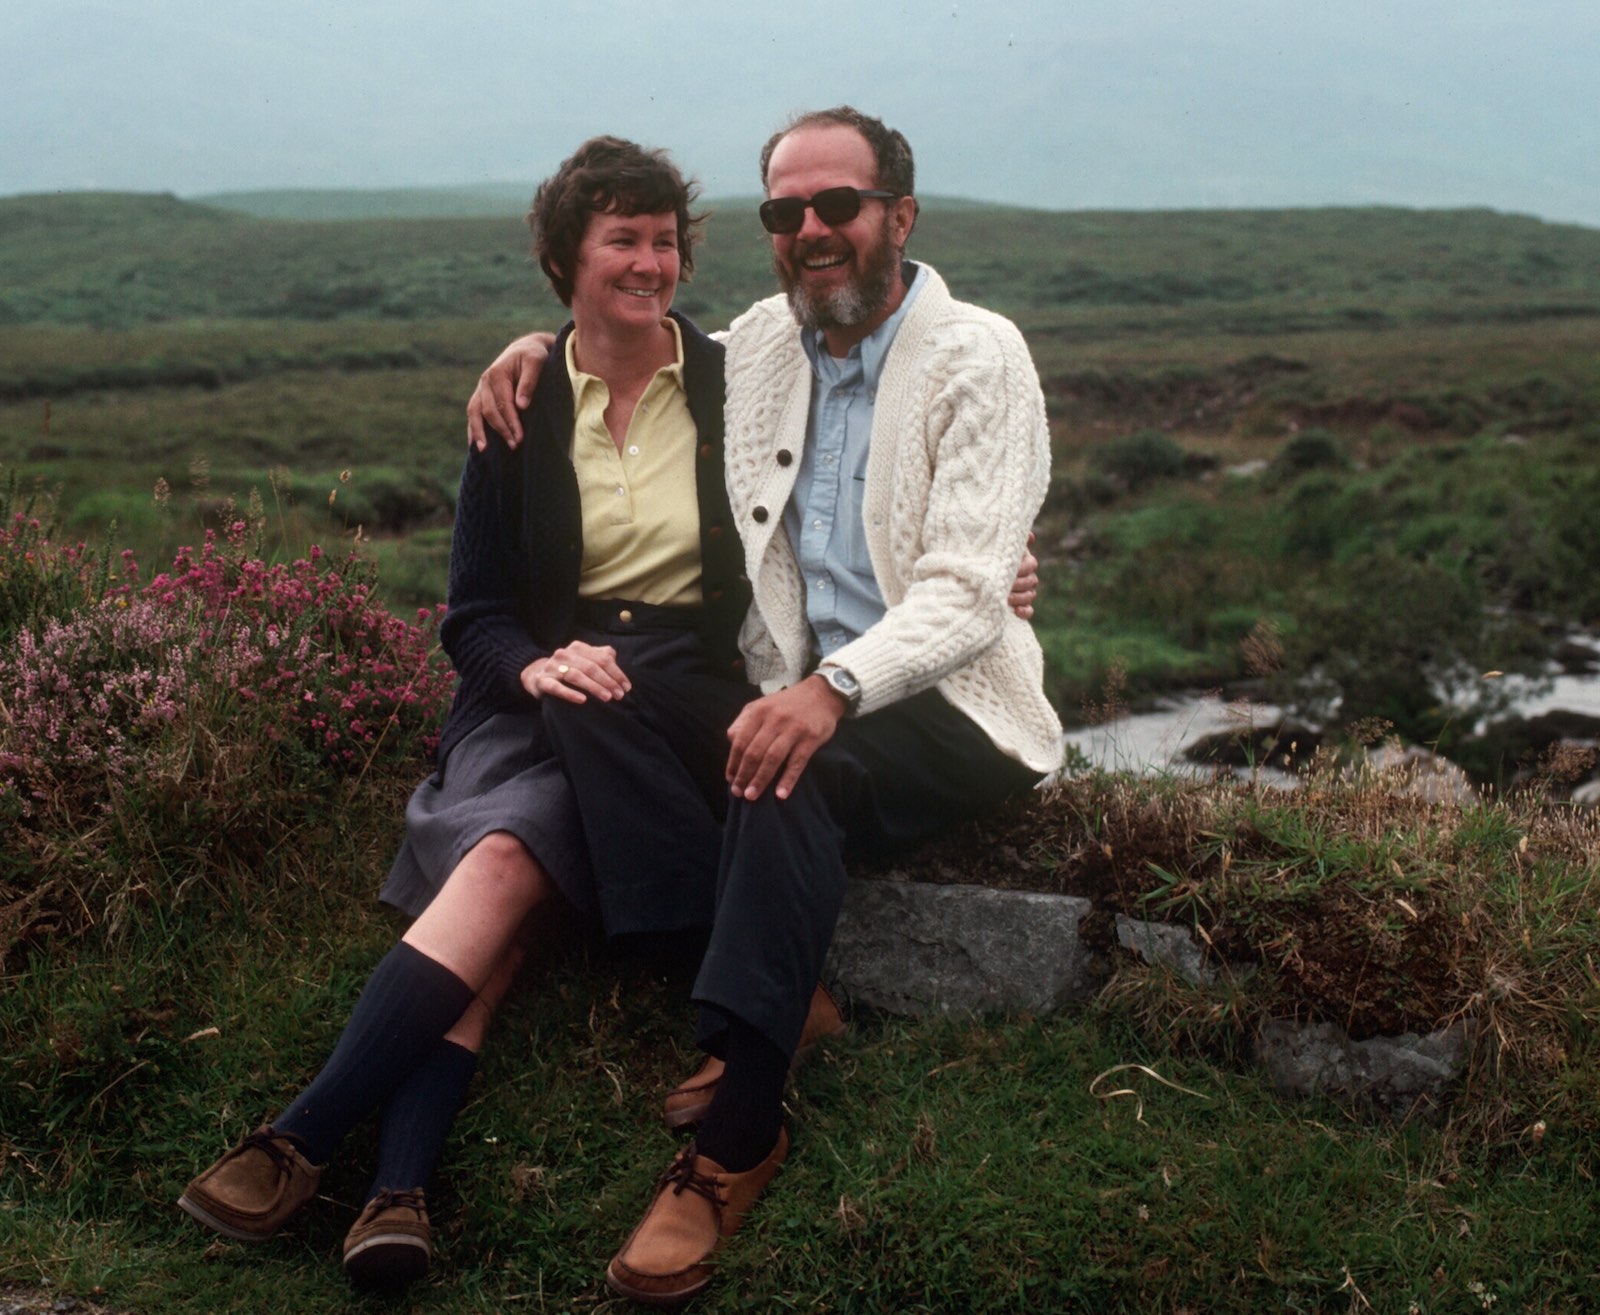 Bill and Judy Hunter in front of a green field